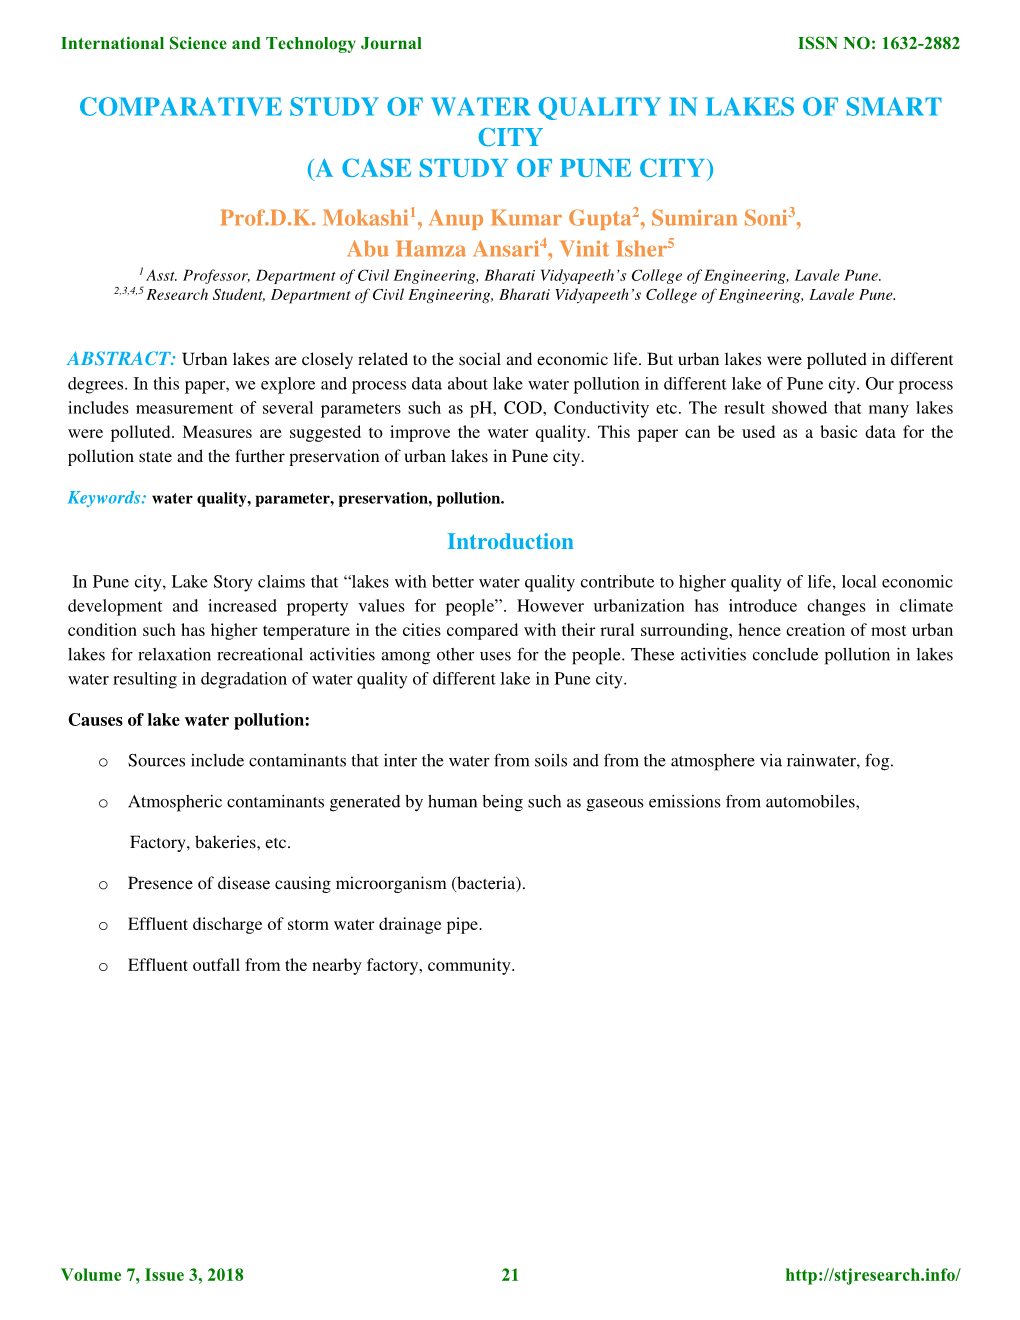 Comparative Study of Water Quality in Lakes of Smart City (A Case Study of Pune City)